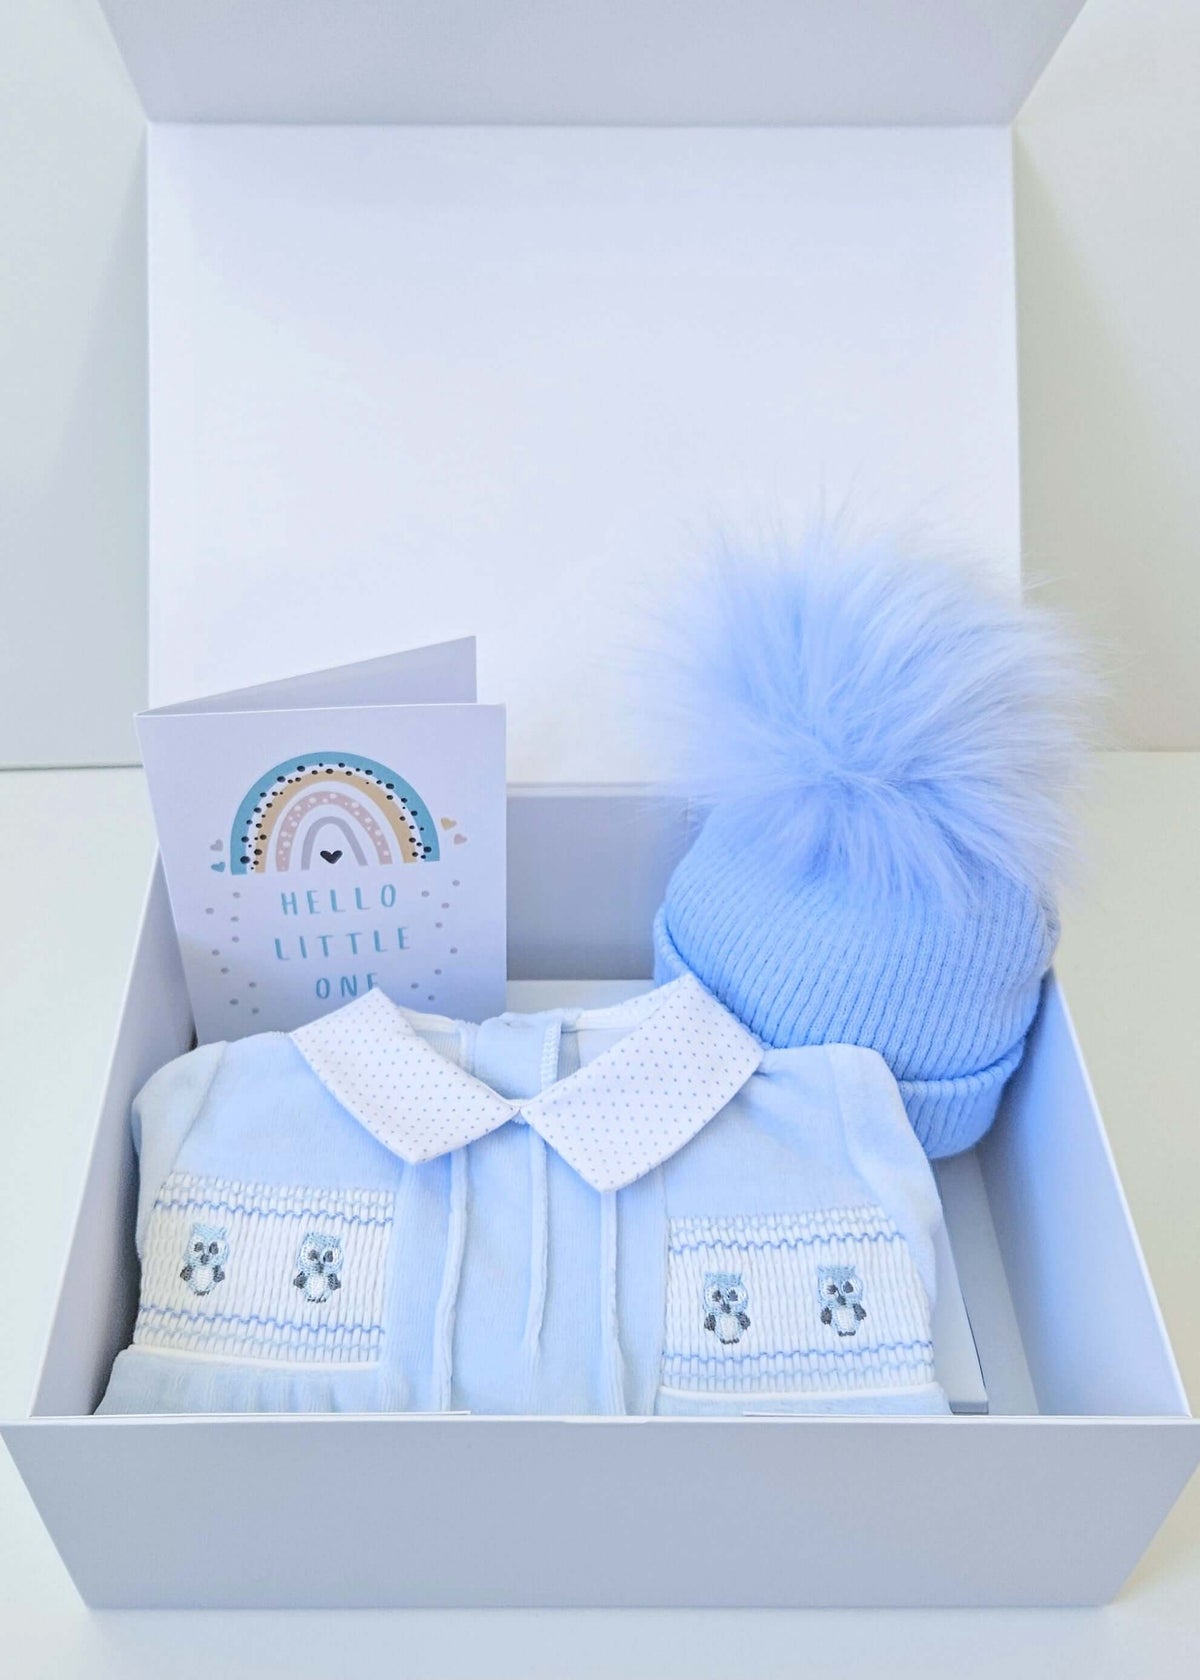 Baby Boy Velour Gift Box: Featuring an Owl Velour sleepsuit, a cosy Pom Pom hat, and a sweet 'New Baby' card, this luxurious gift set is perfect for welcoming a baby boy into the world.